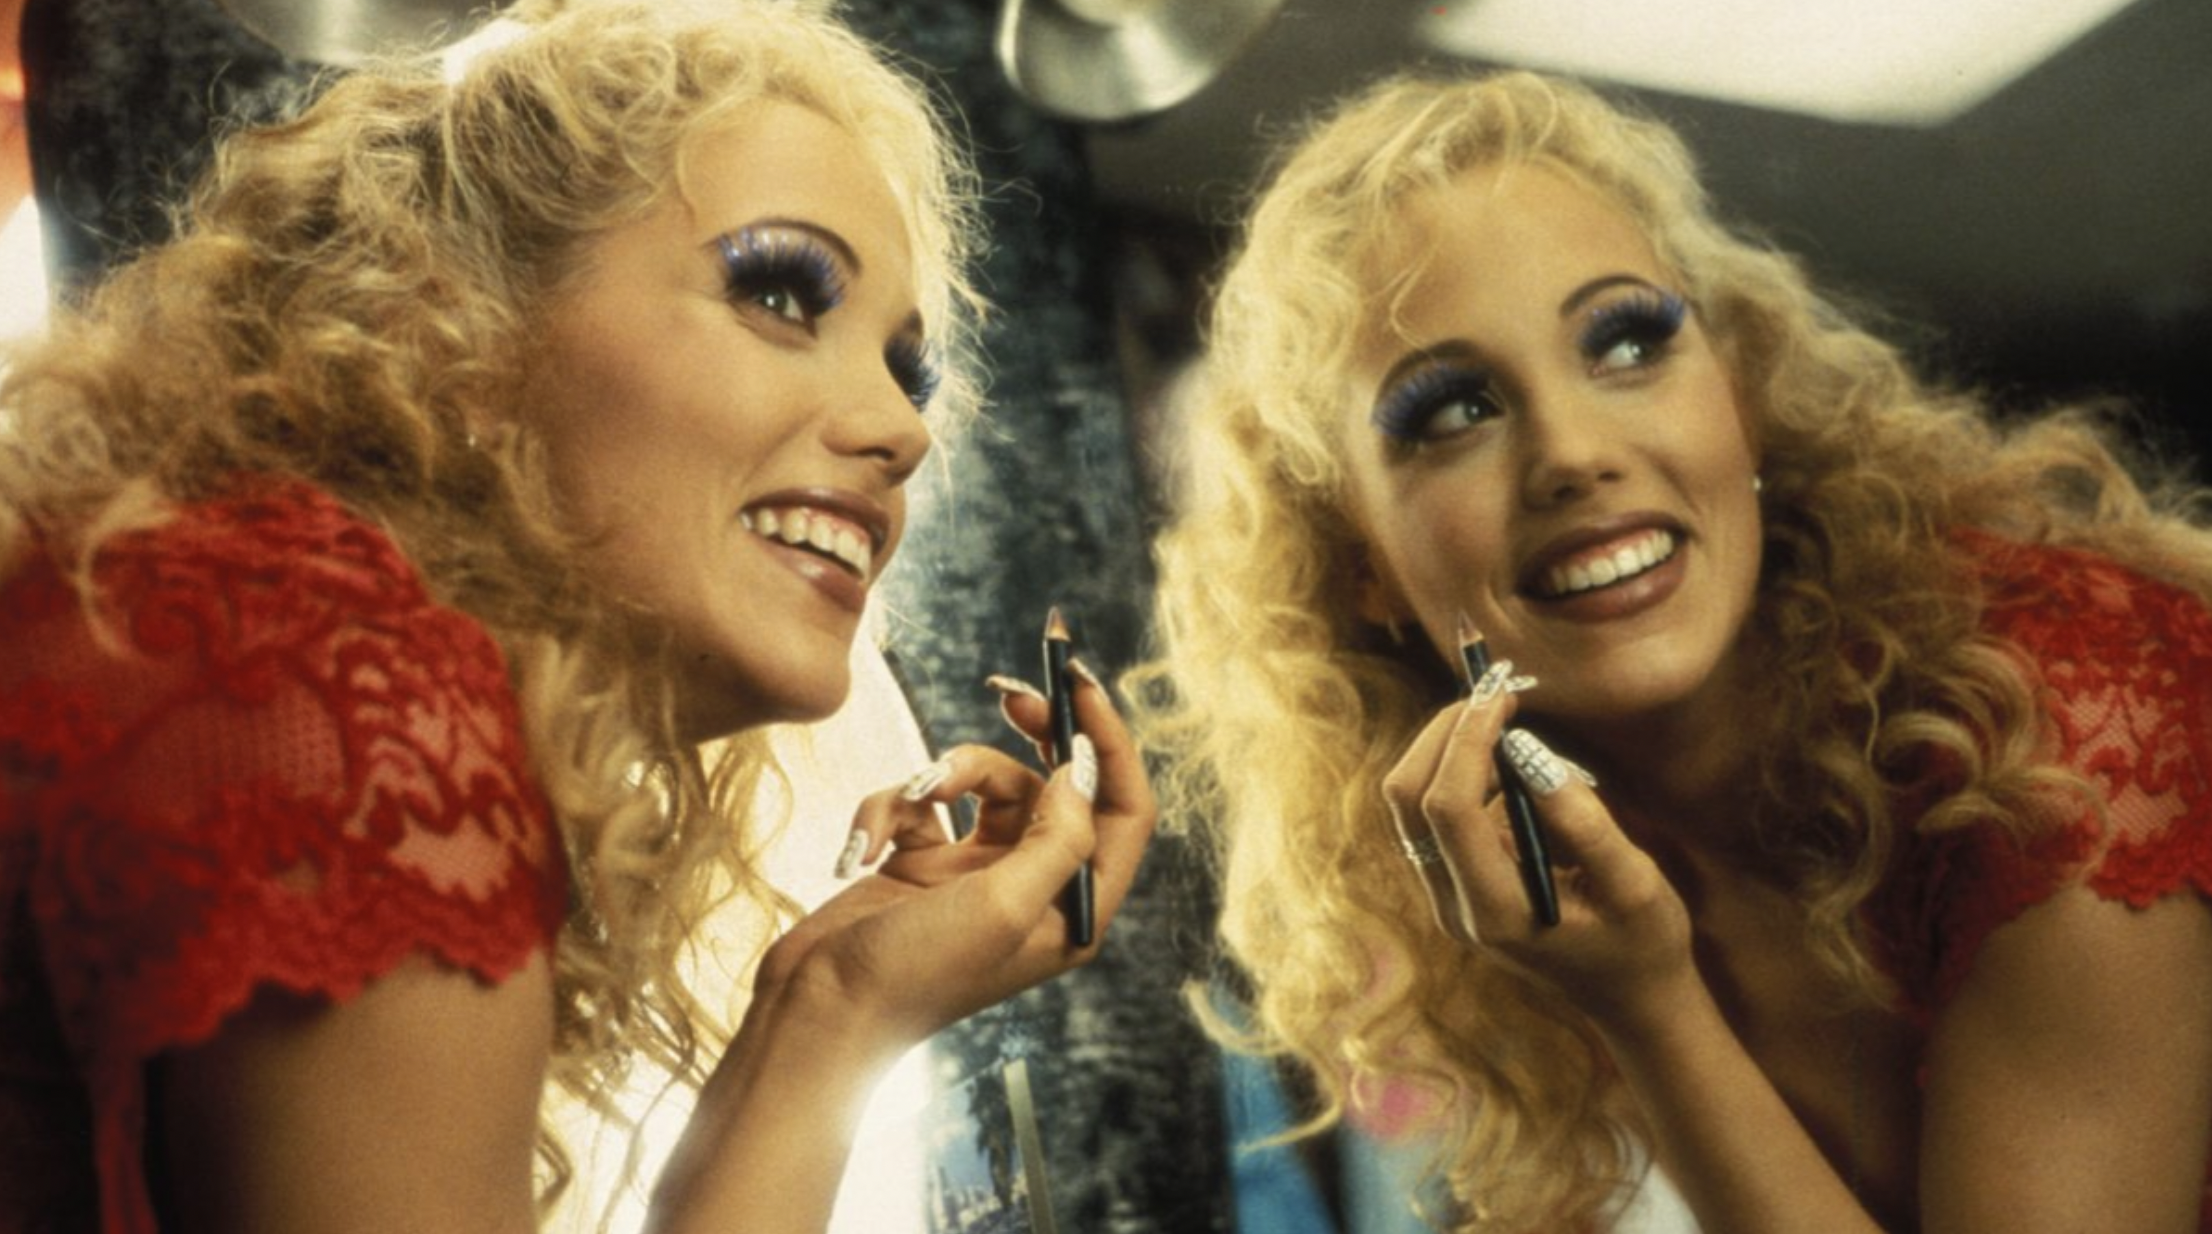 A still from the movie Showgirls featuring the character Nomi Malone looking away from a mirror while applying lipstick and smiling.